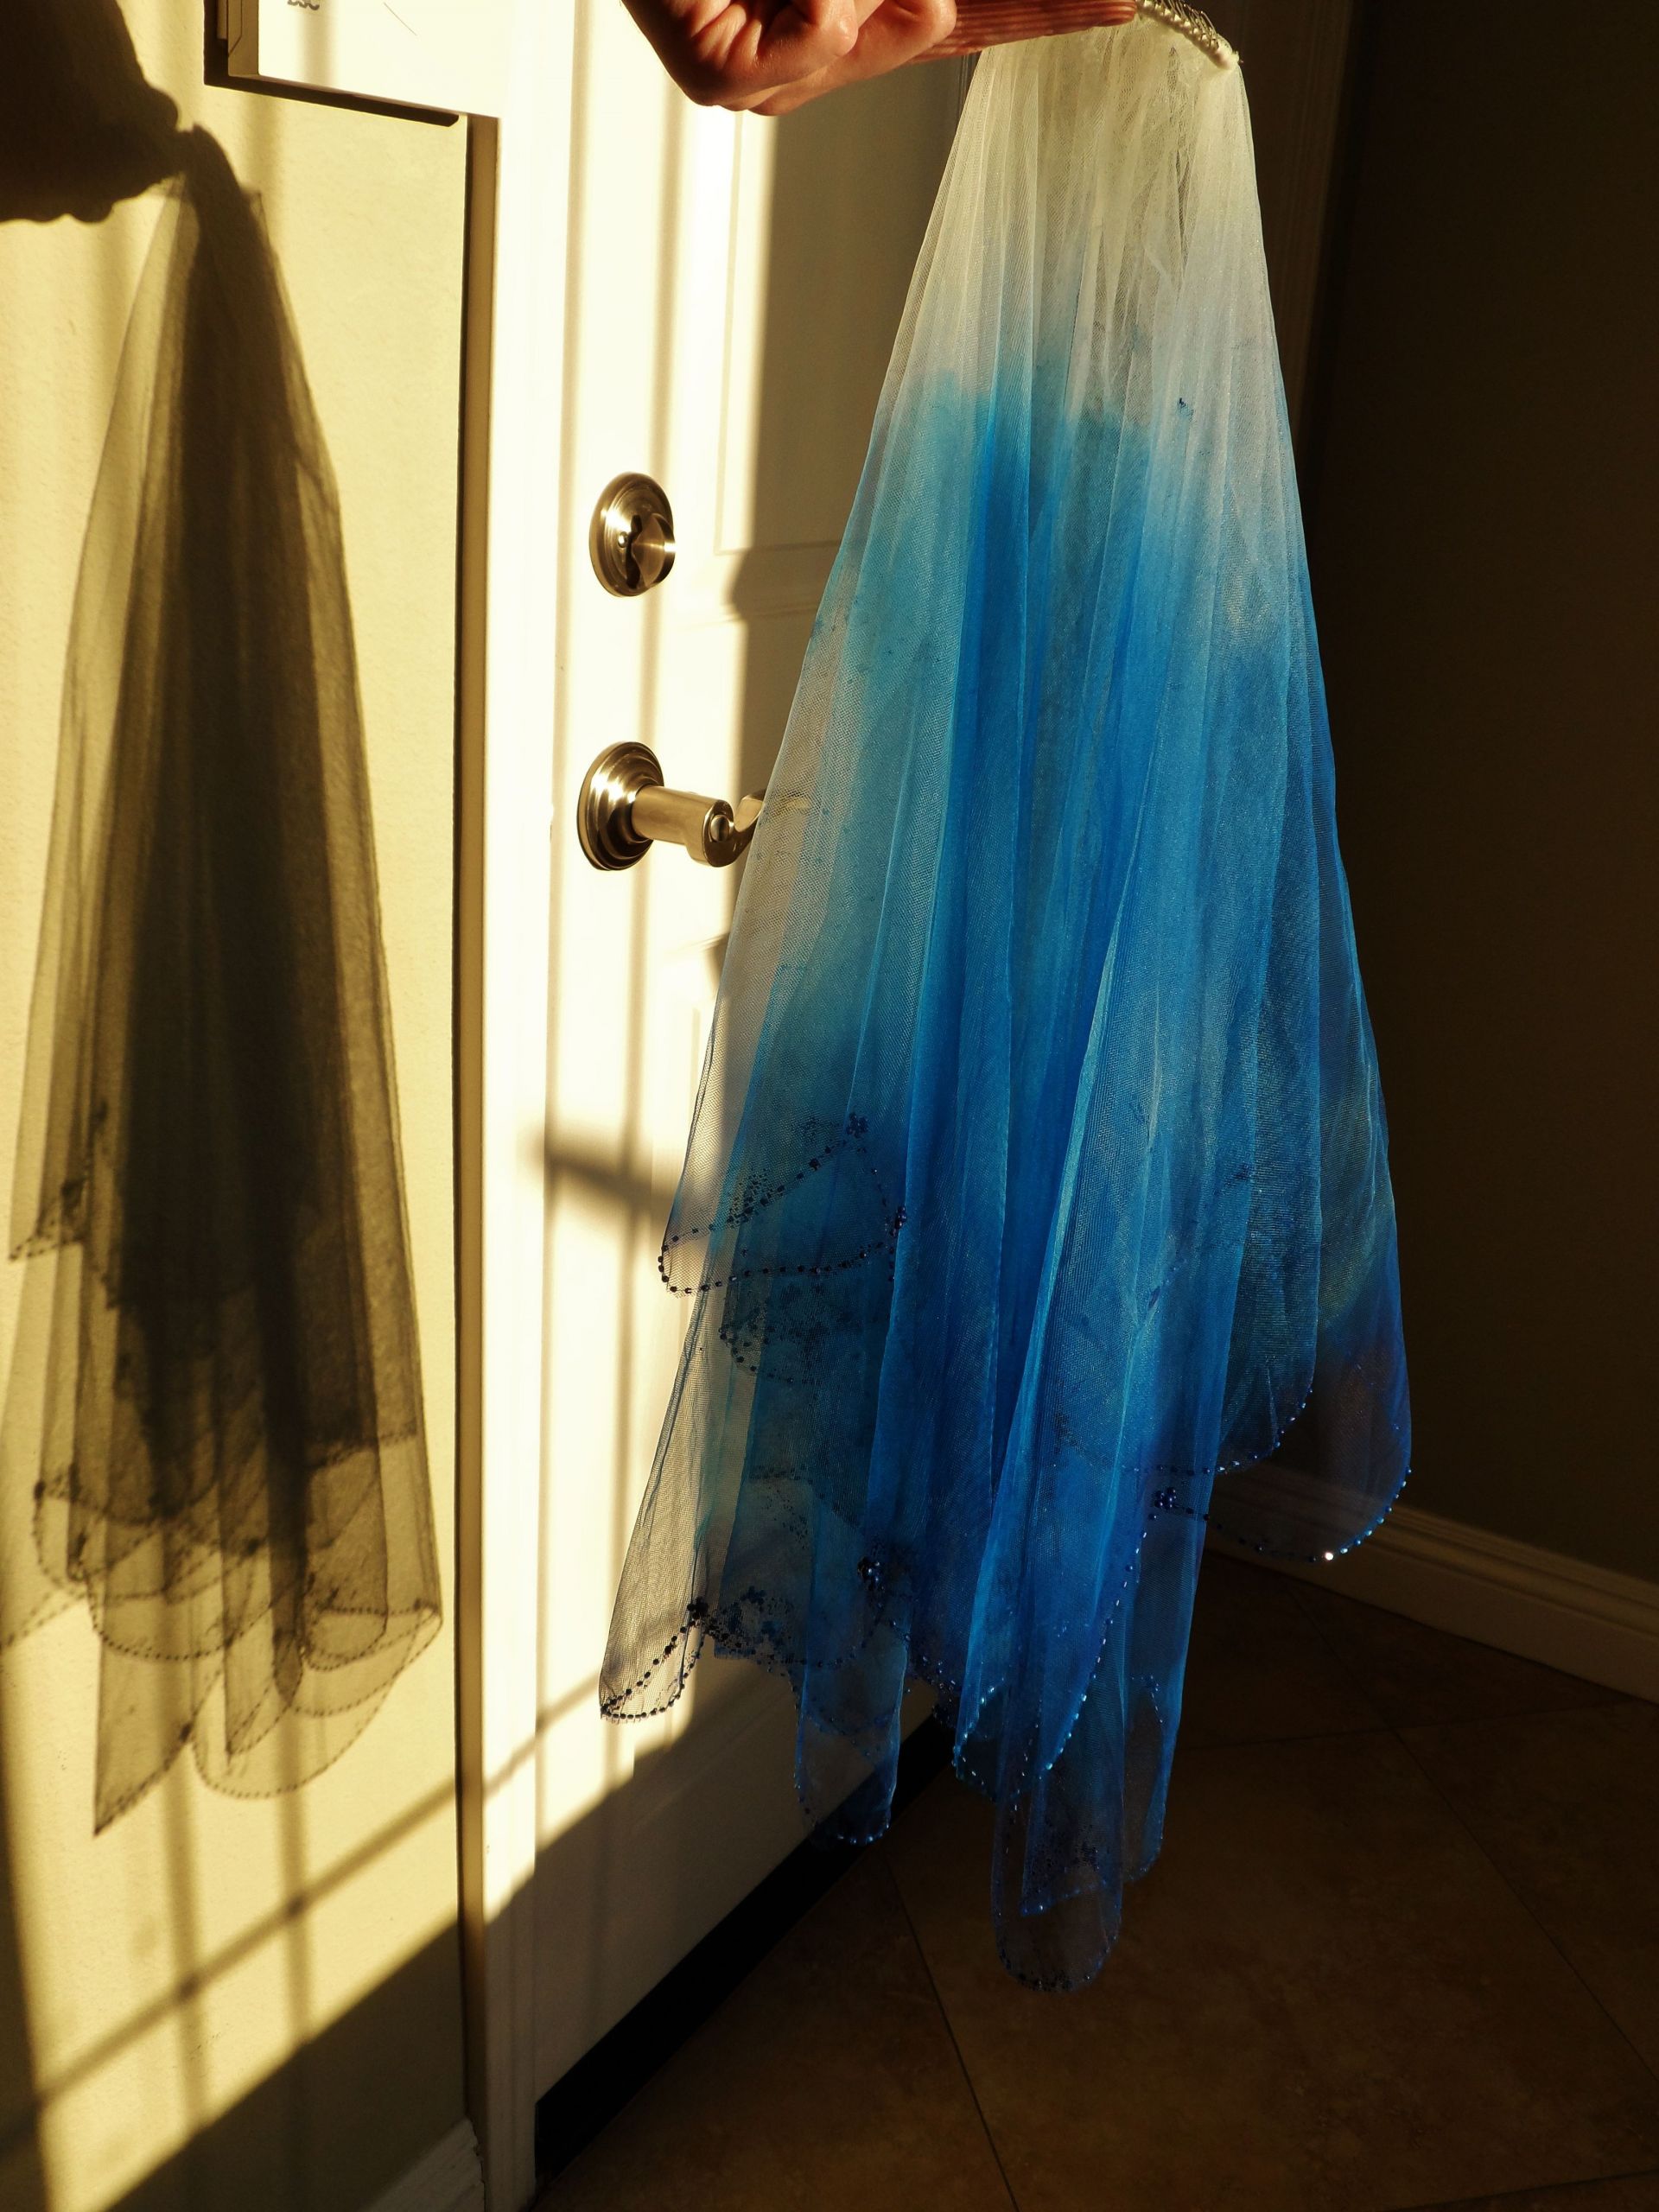 Blue Wedding Veil
 My ombre dip dyed blue wedding veil Done with spray paint